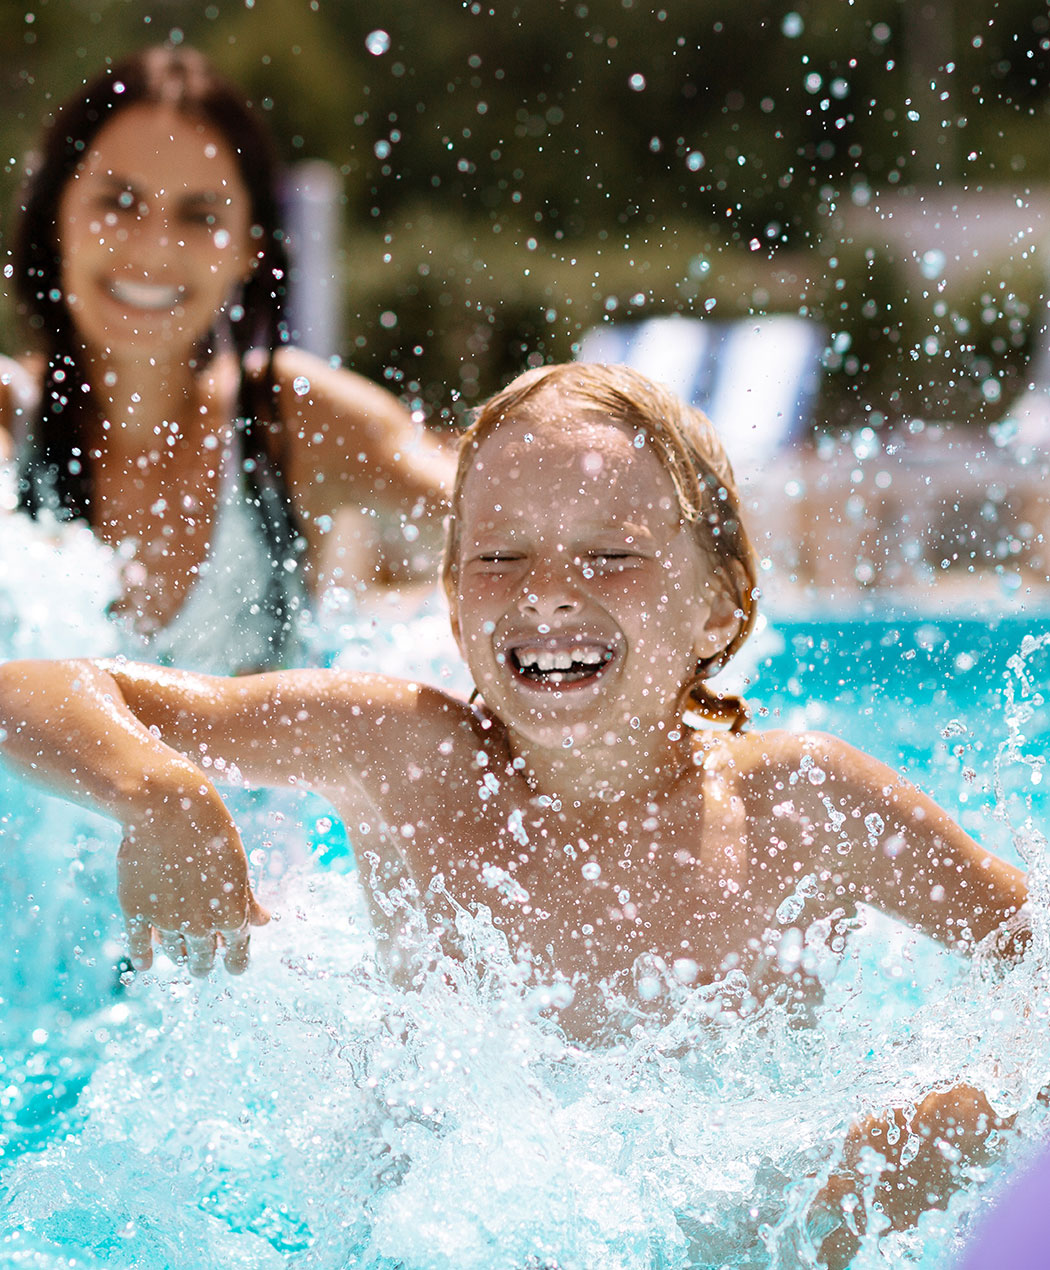 Boy in pool splashing water with mom in background